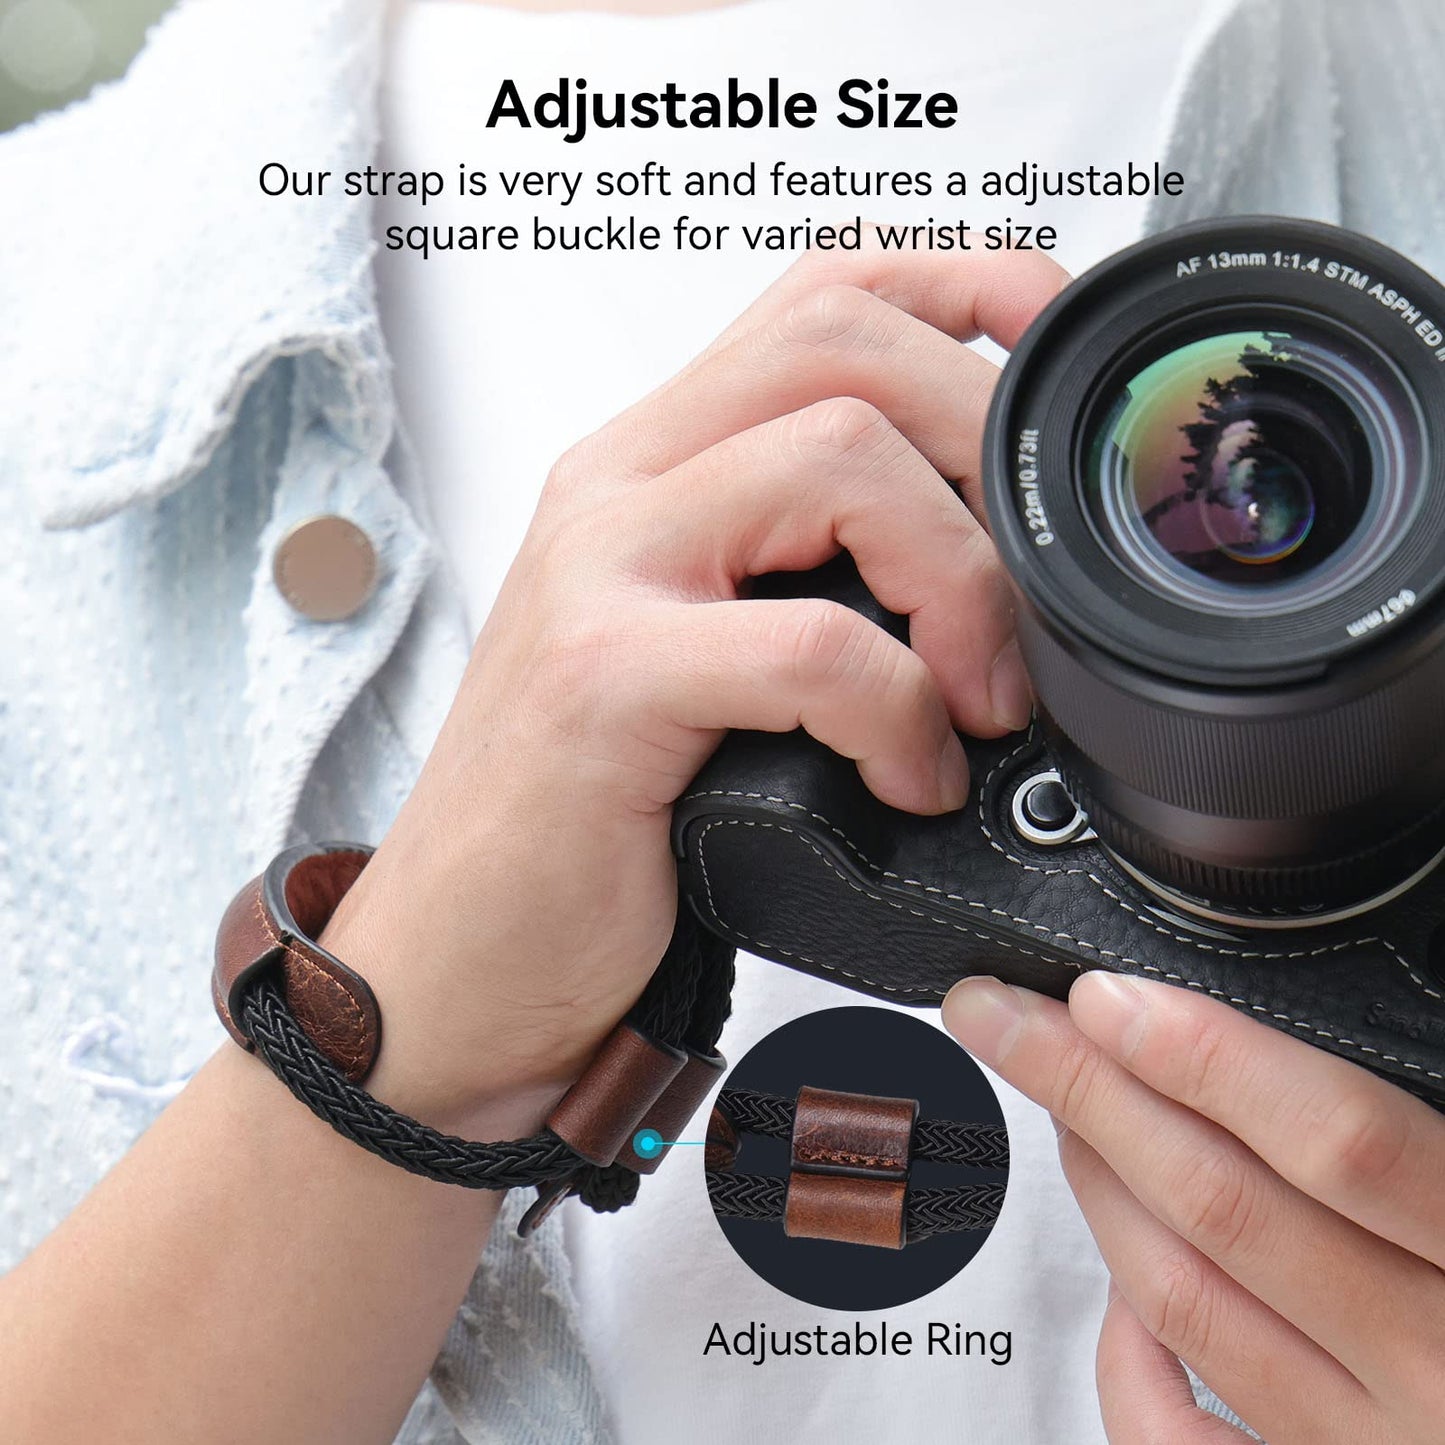 SMALLRIG Camera Wrist Strap, Vintage Leather Camera Hand Strap for DSLR SLR Mirrorless, Adjustable Safety Strap for Fujifilm X-T5 X-T4 X-T3 X-T30 X-E4 X100V and Other Compact Cameras, Brown - 3926